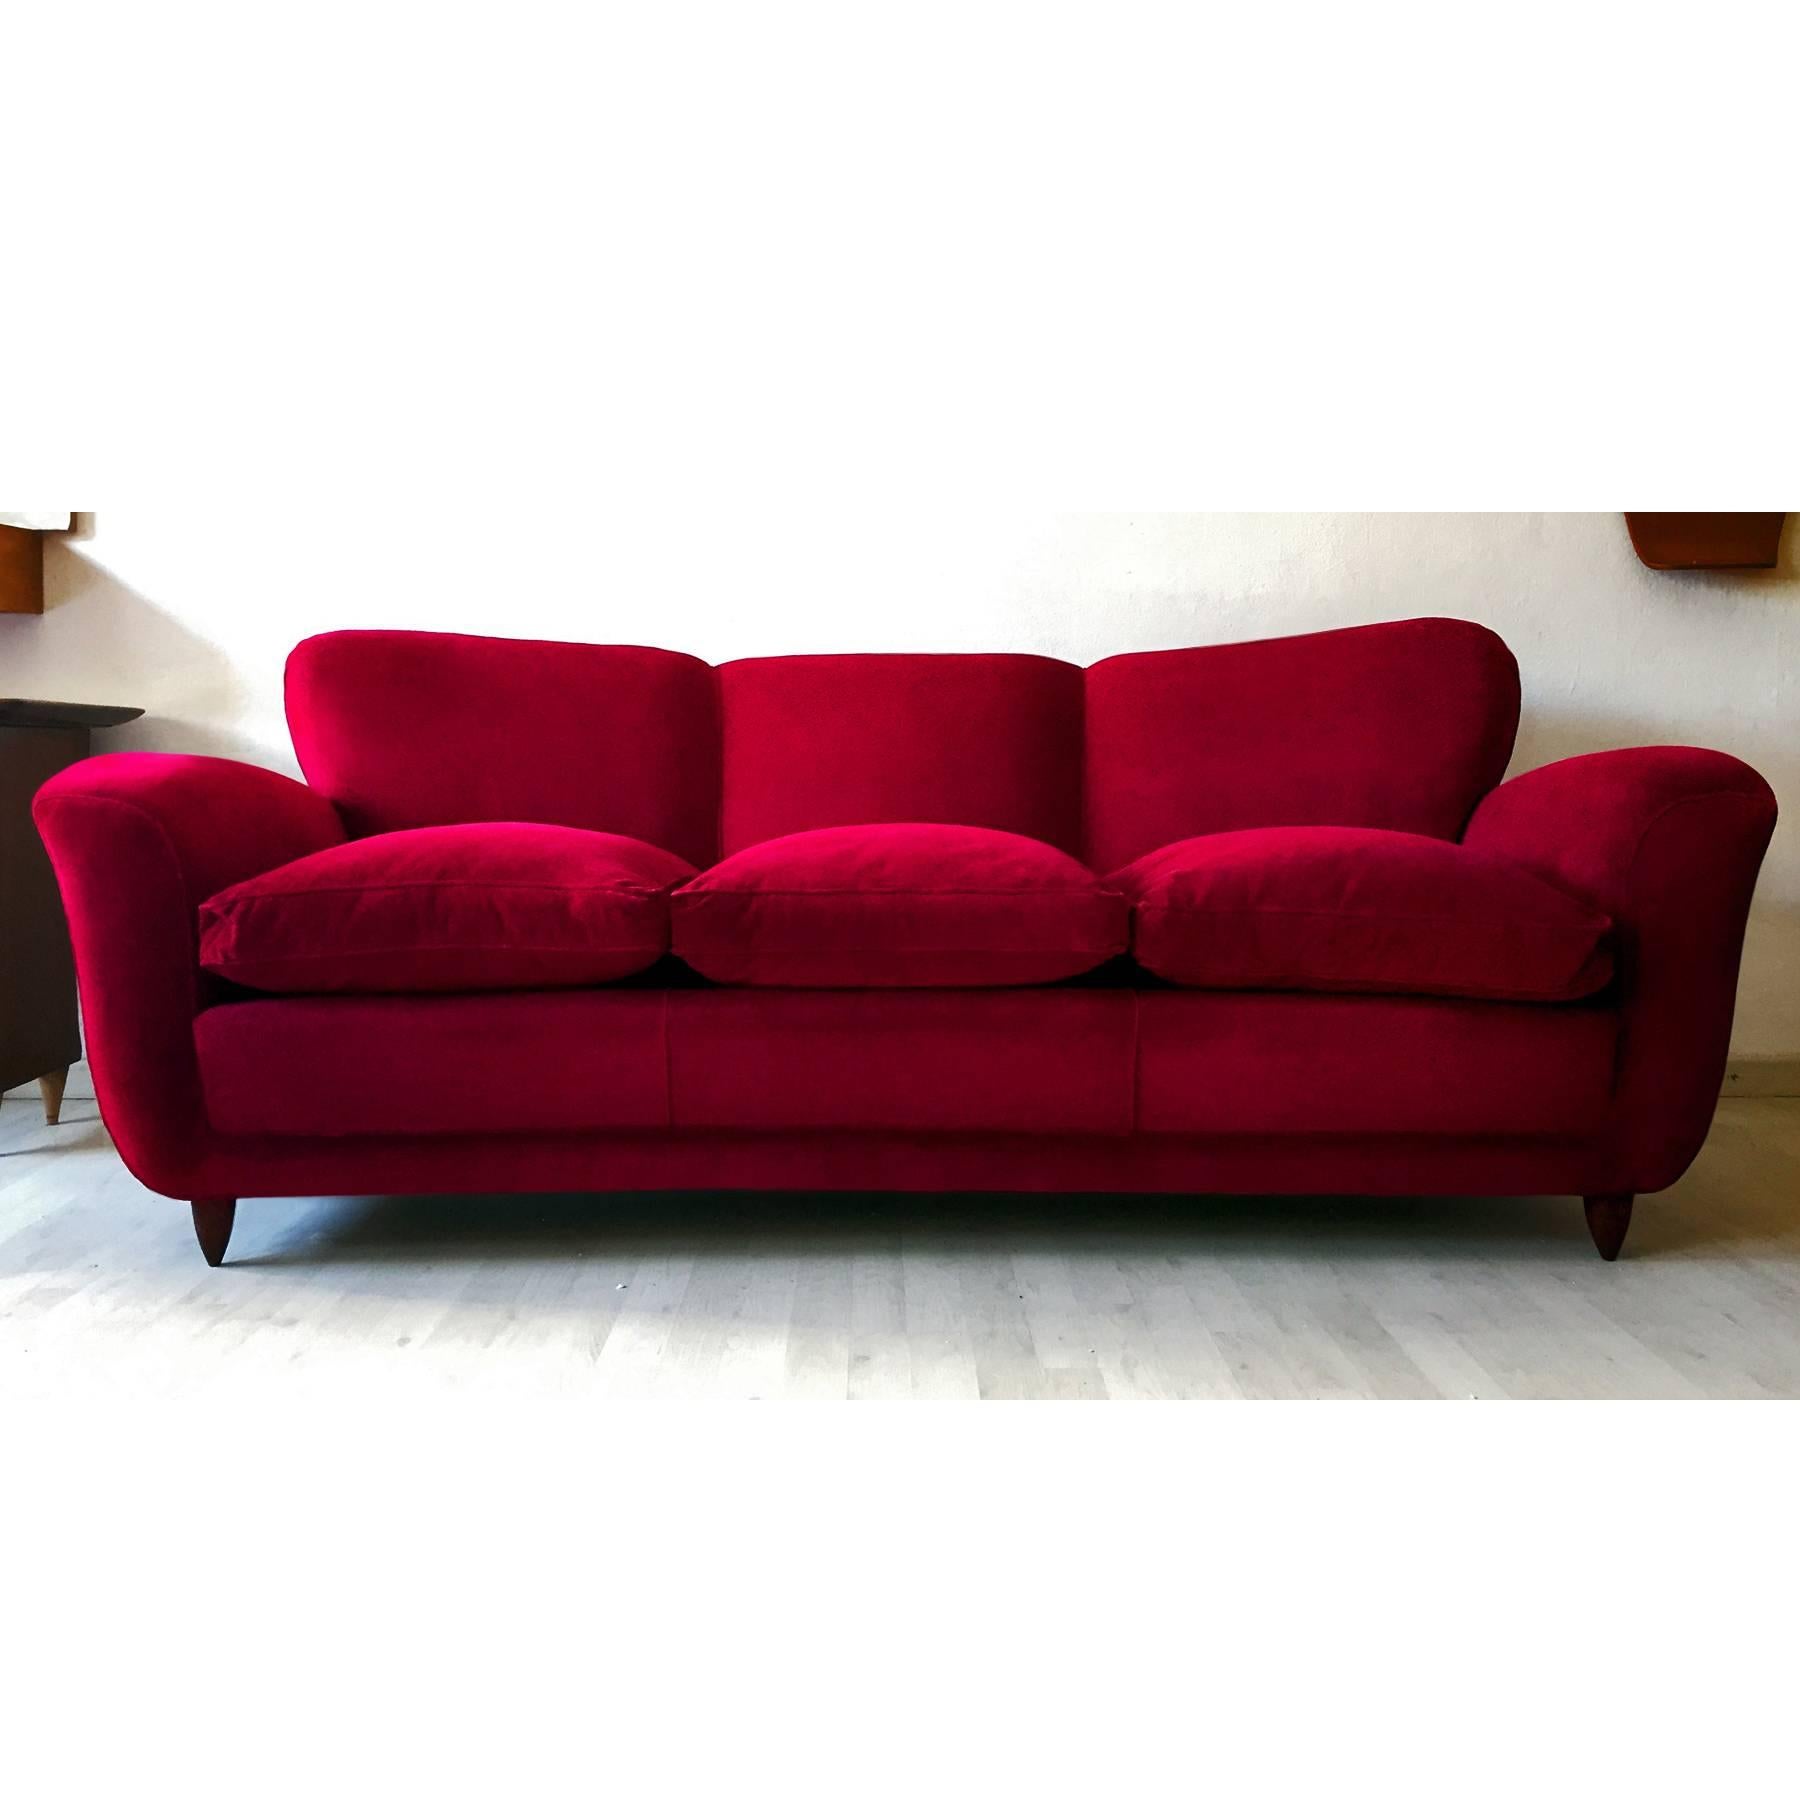 Very stylish and extremely comfortable Italian sofa three-seat with winged backs, design attributable to Guglielmo Ulrich in the 1950s.
It's upholstered in a gorgeous deep scarlet red velvet, original of the period and preserved in excellent